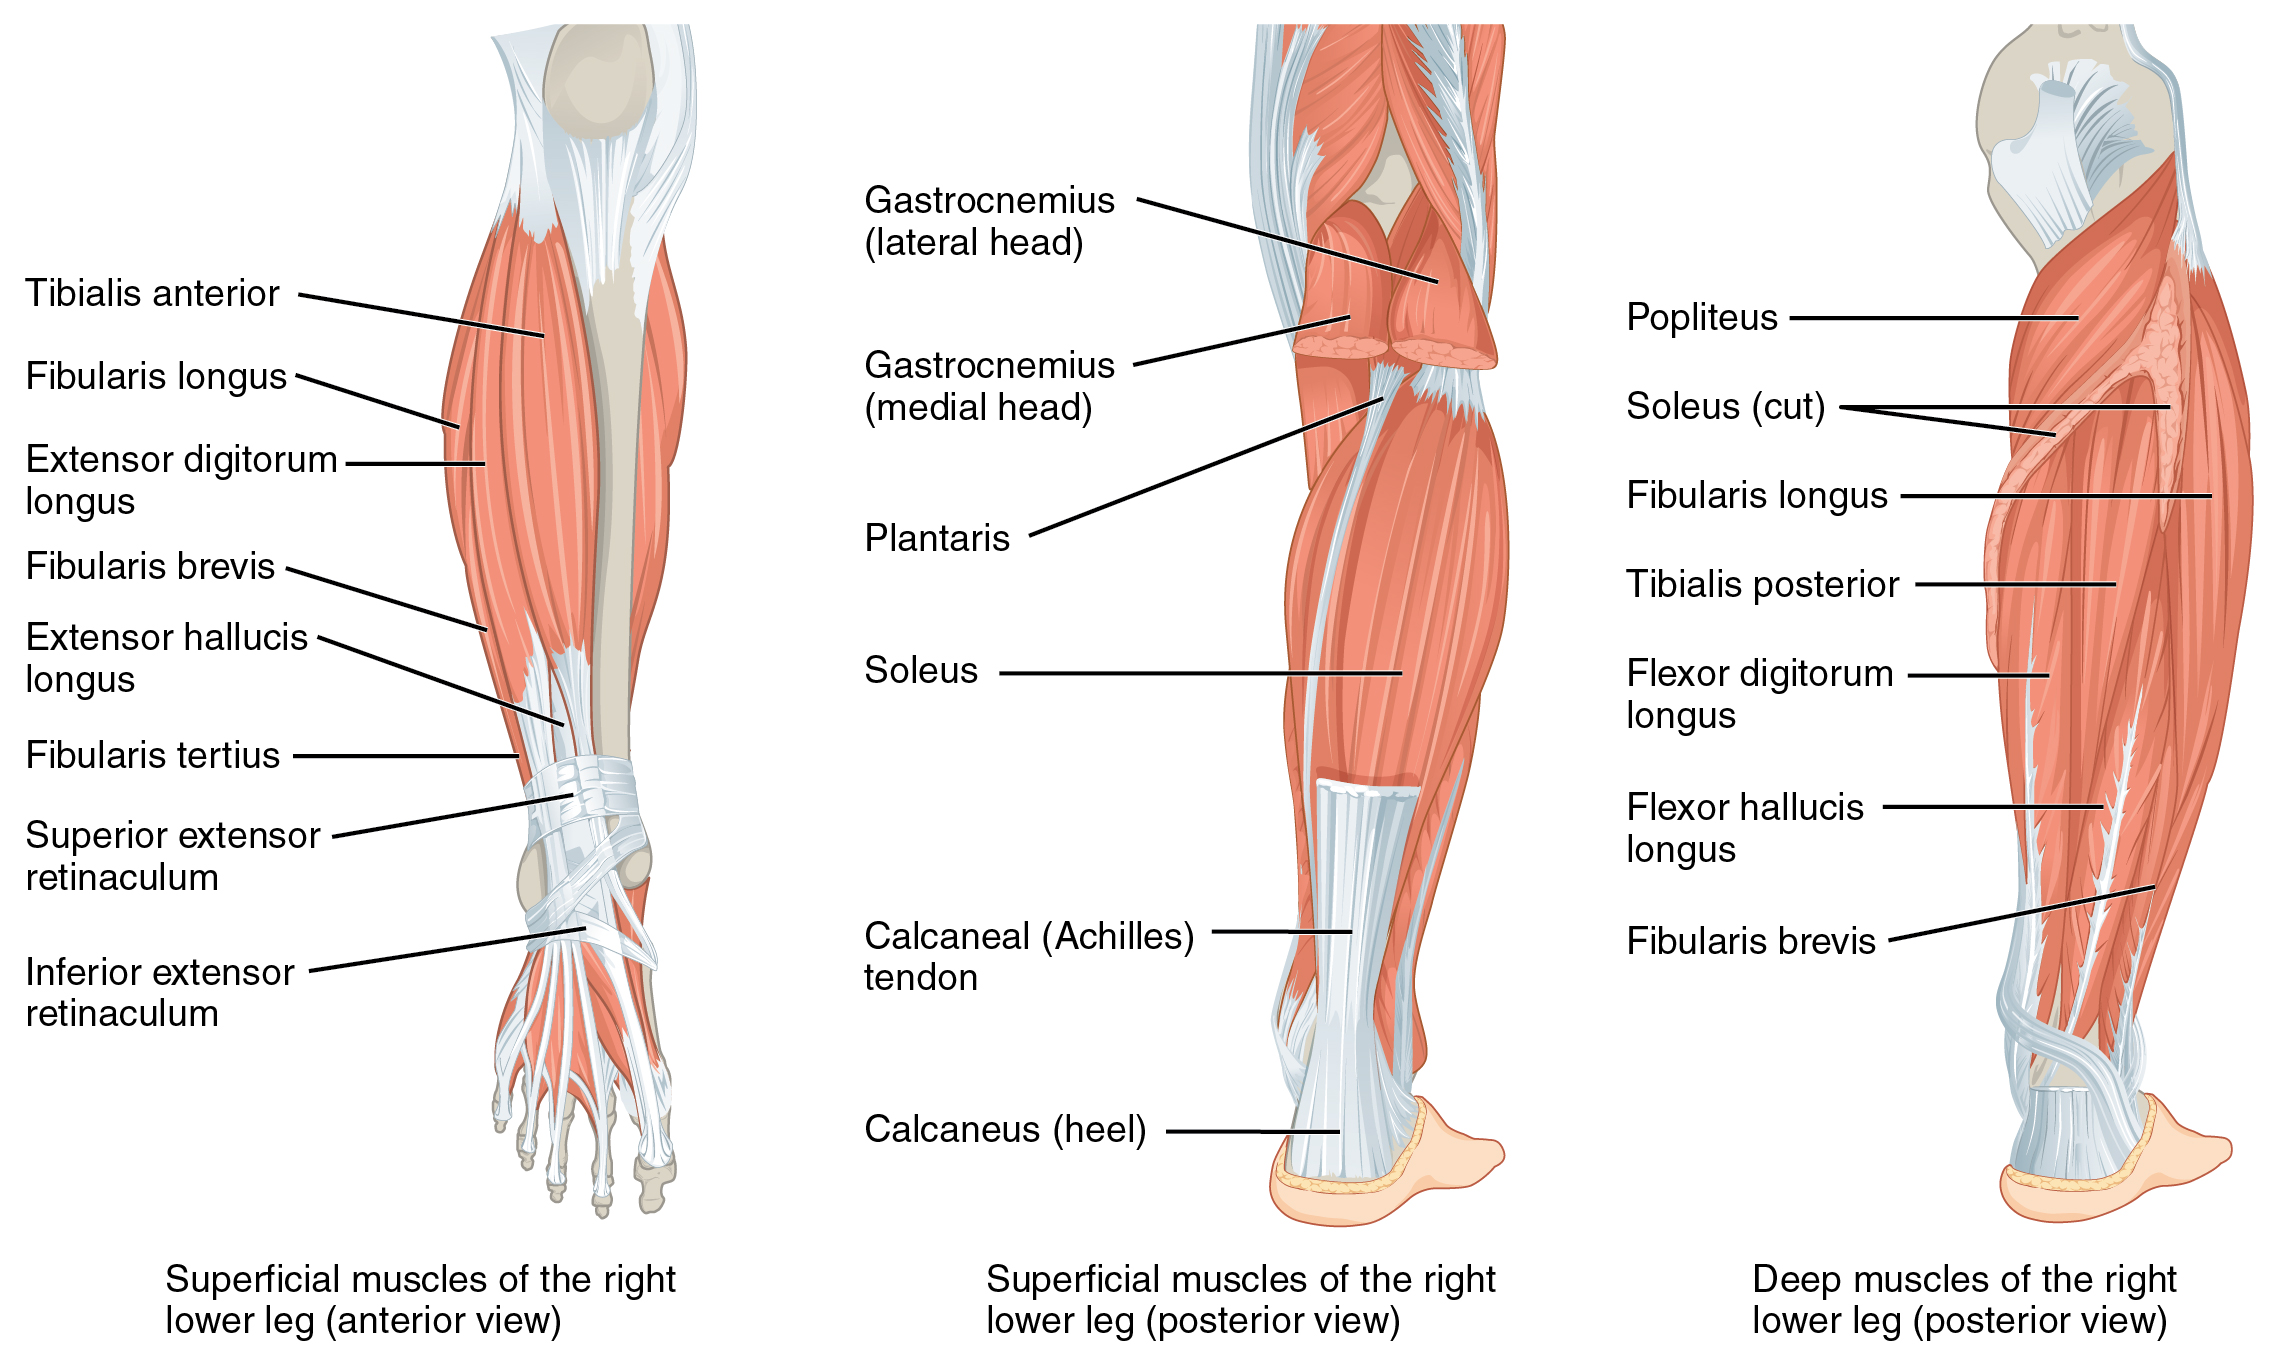 The left panel shows the superficial muscles that move the feet and the center panel shows the posterior view of the same muscles. The right panel shows the deep muscles of the right lower leg.